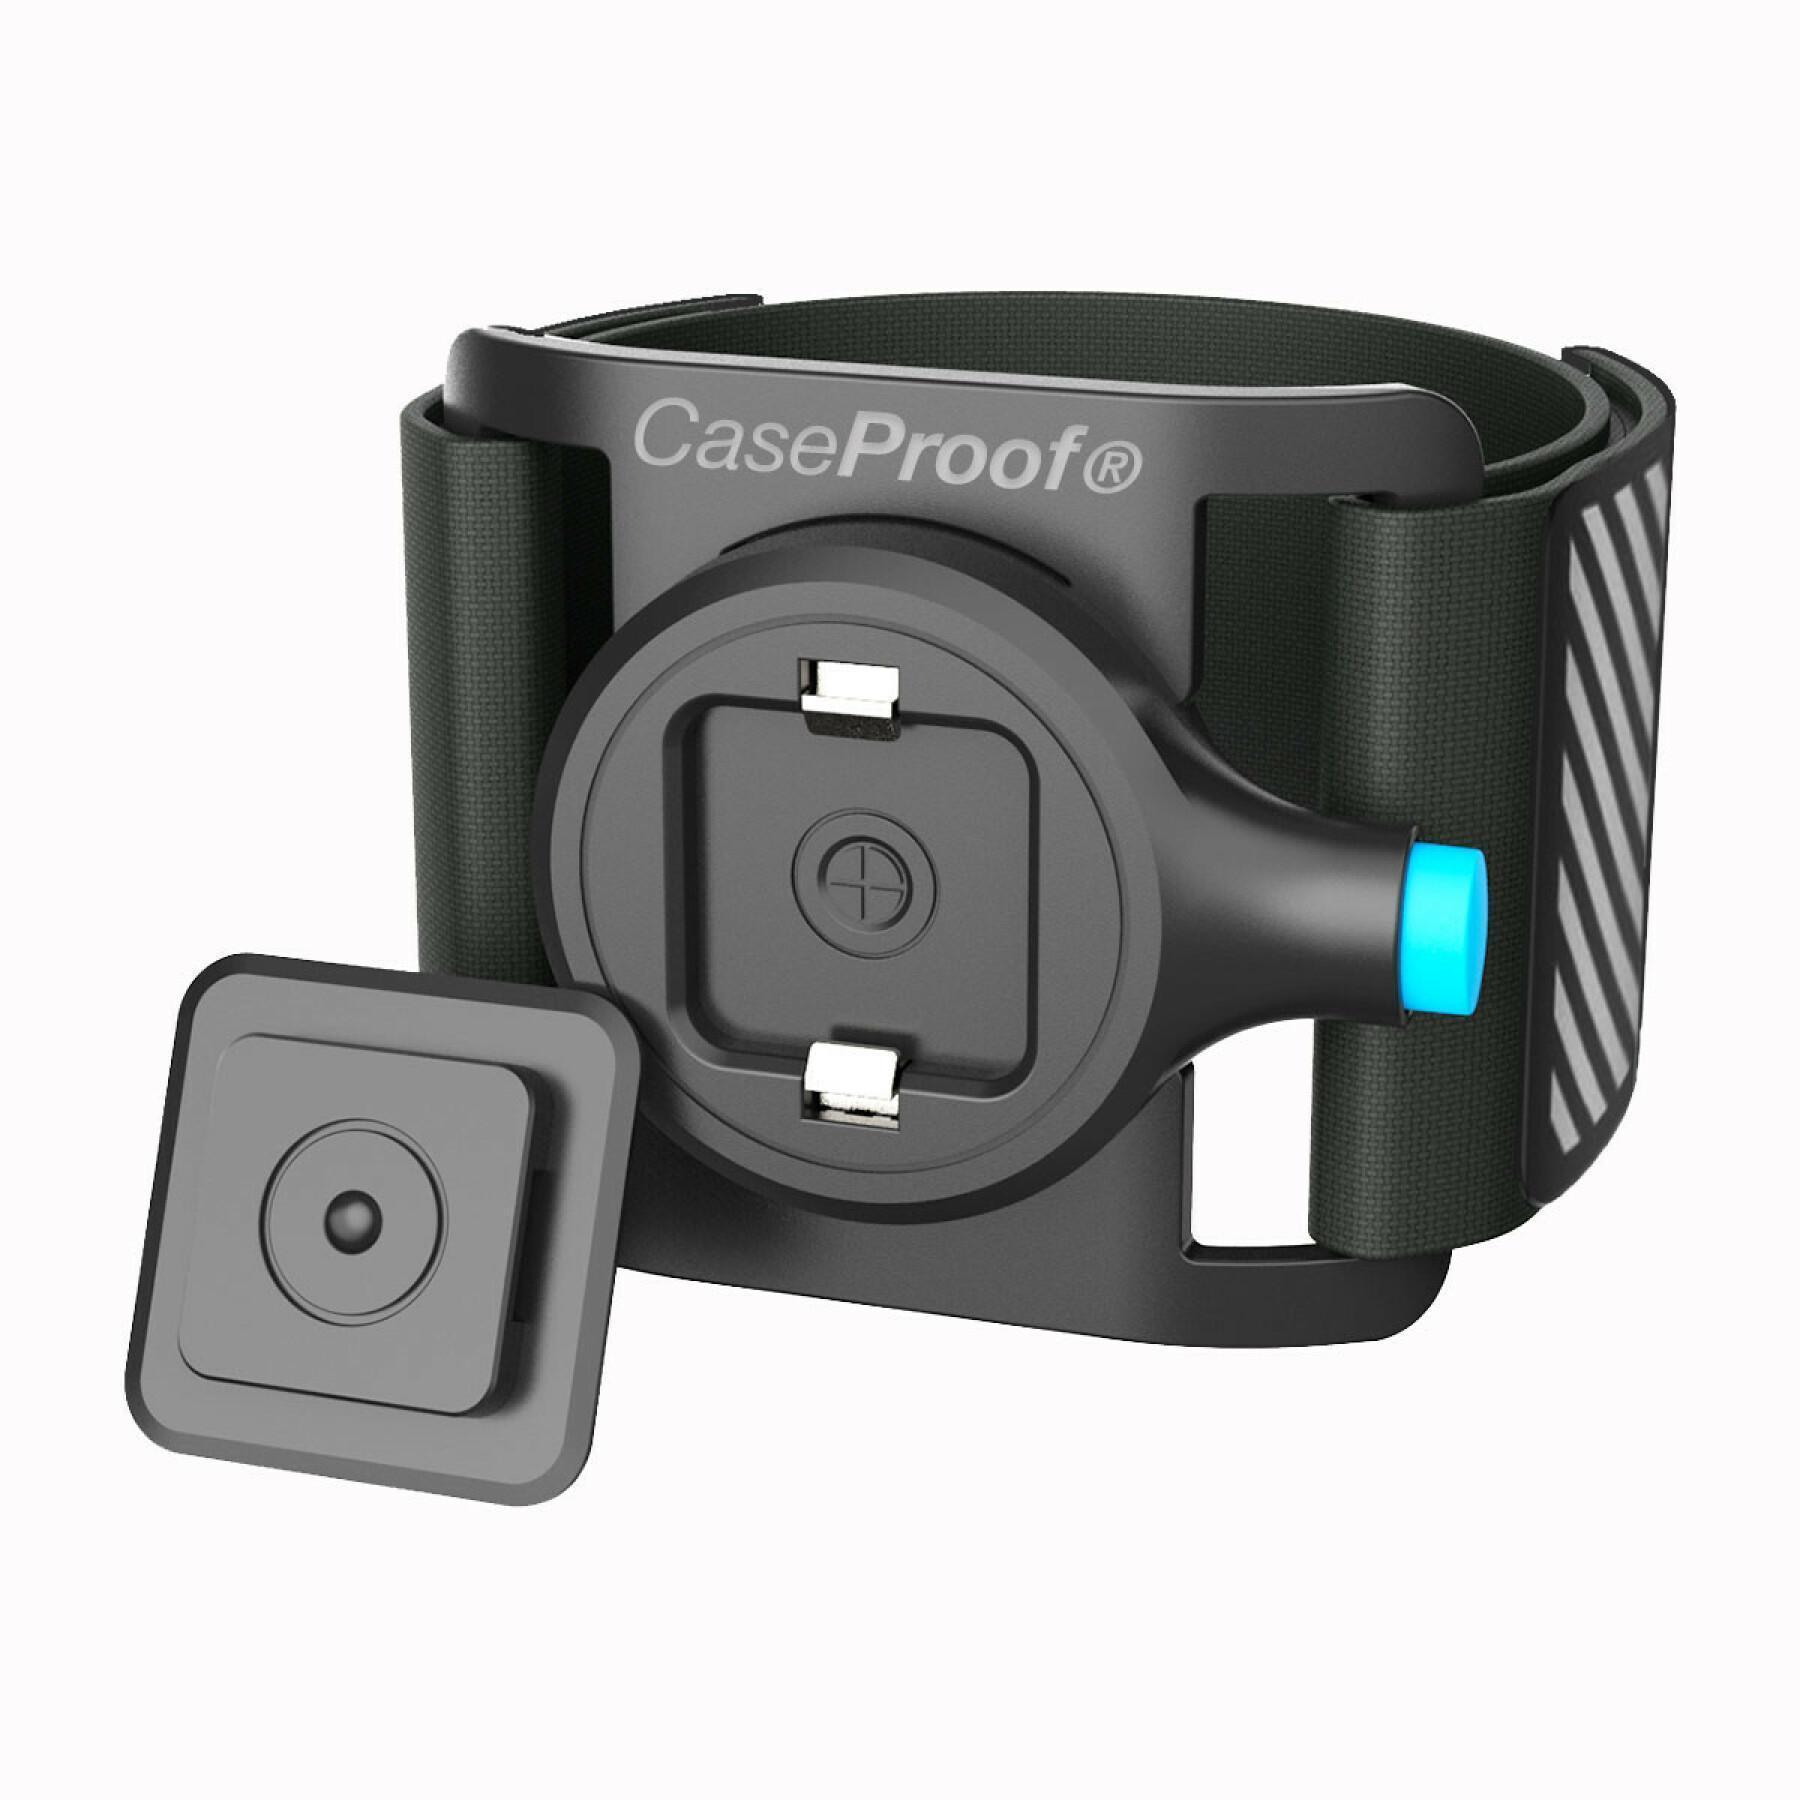 Universal phone armband for running CaseProof